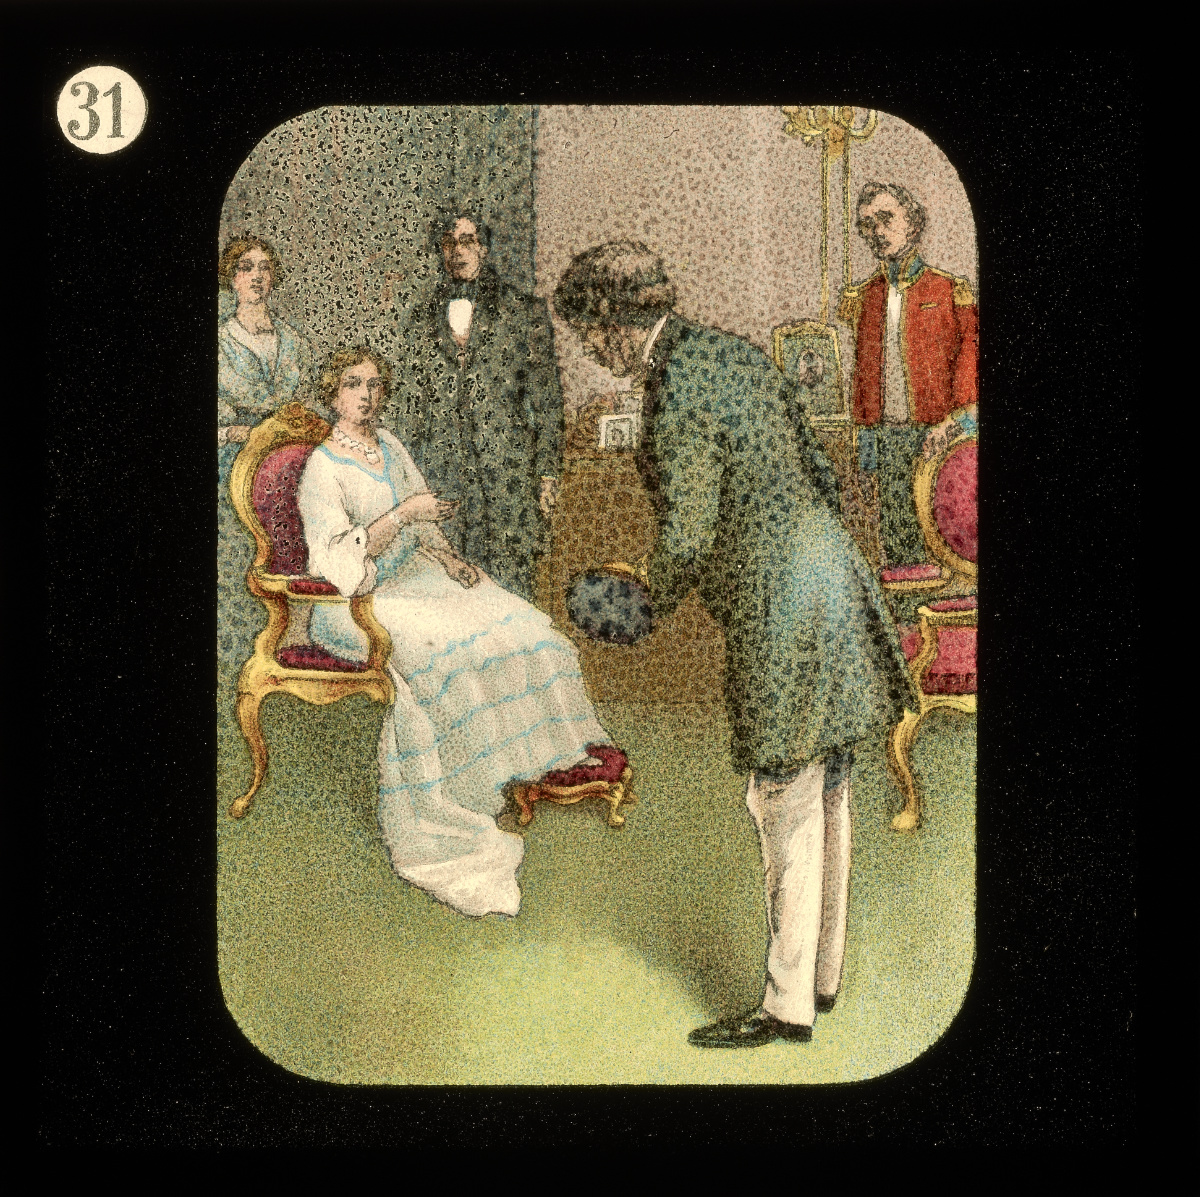 Livingstone Sees the Queen. Image from Lantern Slides of the Life, Adventures, and Work of David Livingstone (London Missionary Society c.1900:[4]). Images courtesy of the Smithsonian Libraries, Washington, D.C.